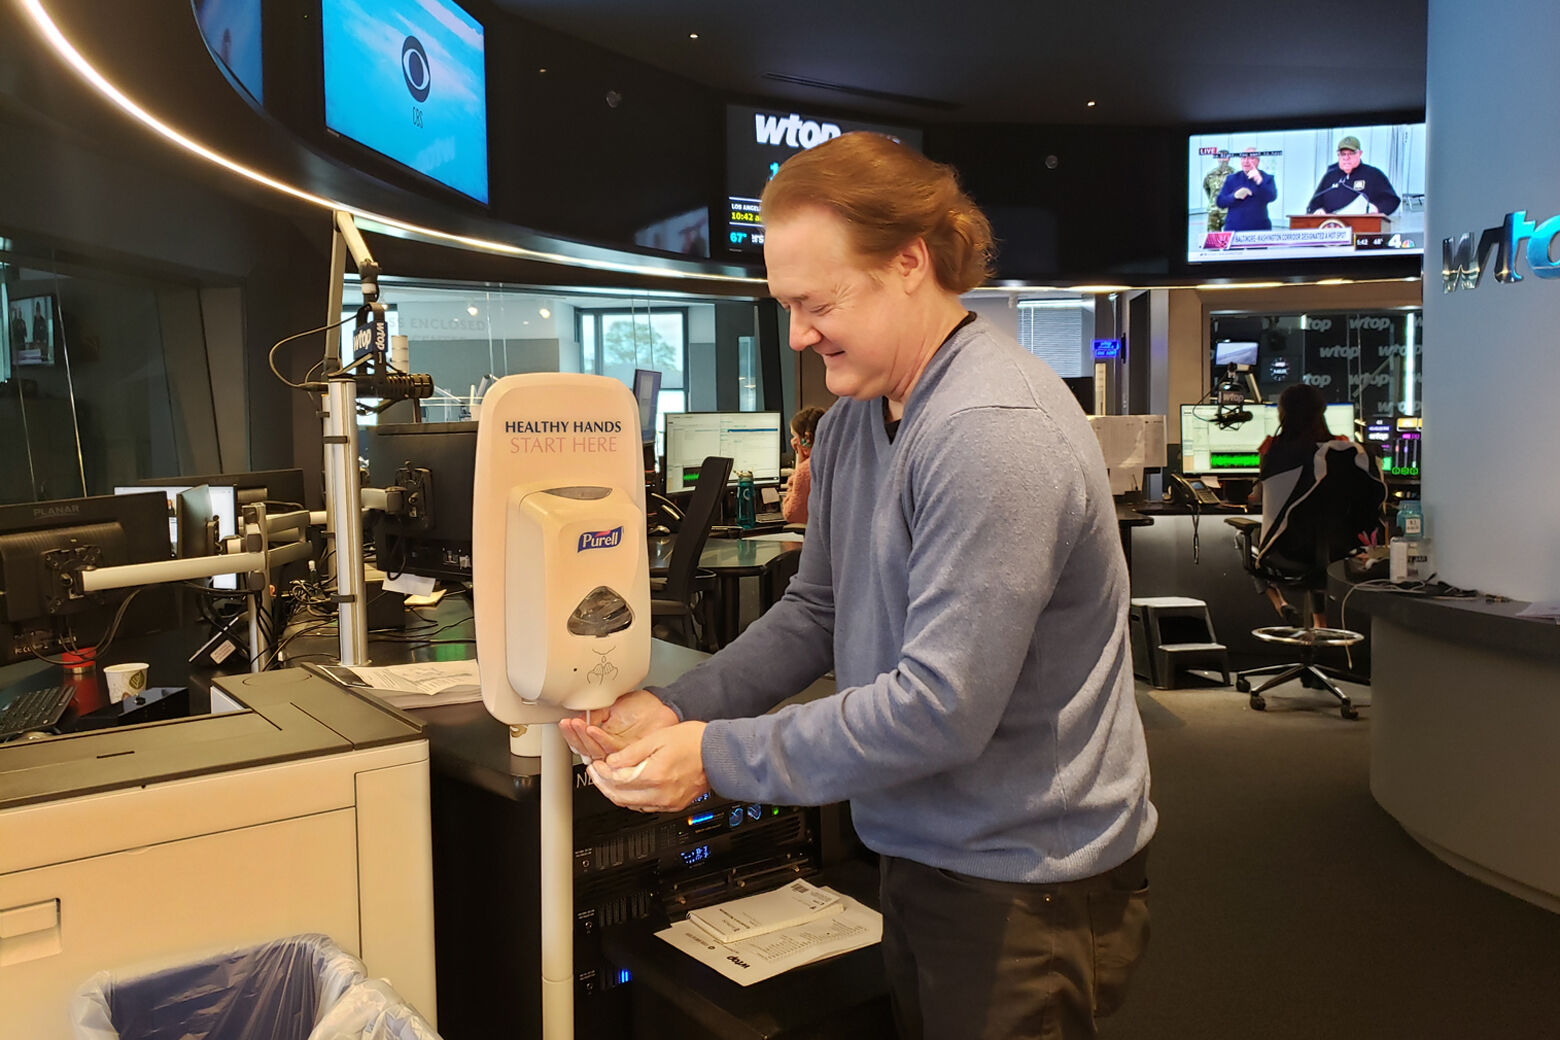 WTOP Afternoon Anchor Shawn Anderson using the newsroom's Purell station.